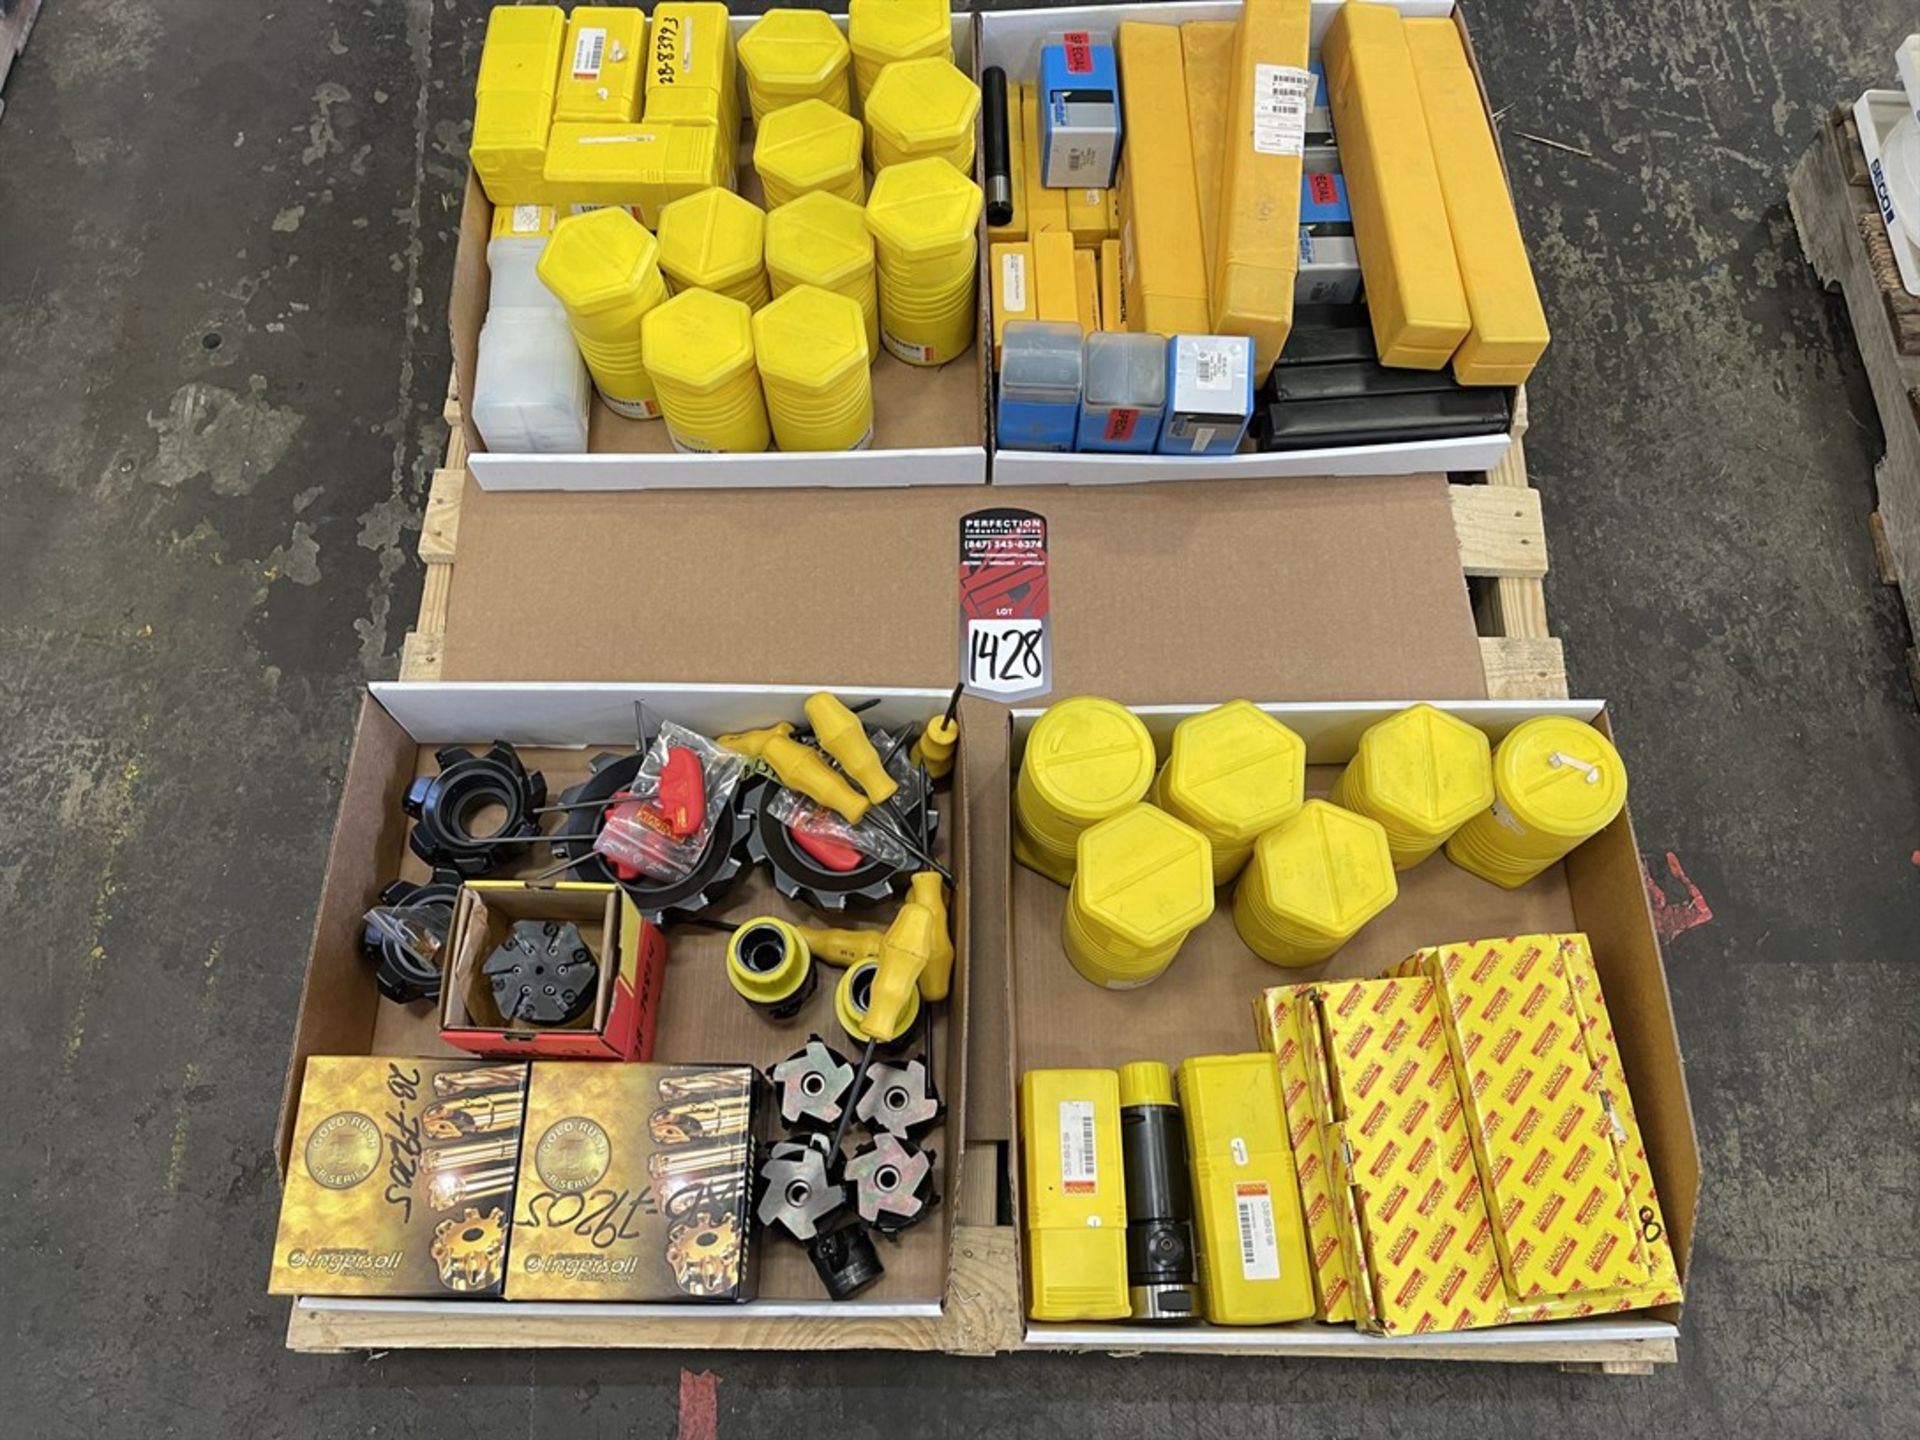 Lot of Assorted Face Mills, Capto C5 Tooling, and Iscar and Kennametal Tooling